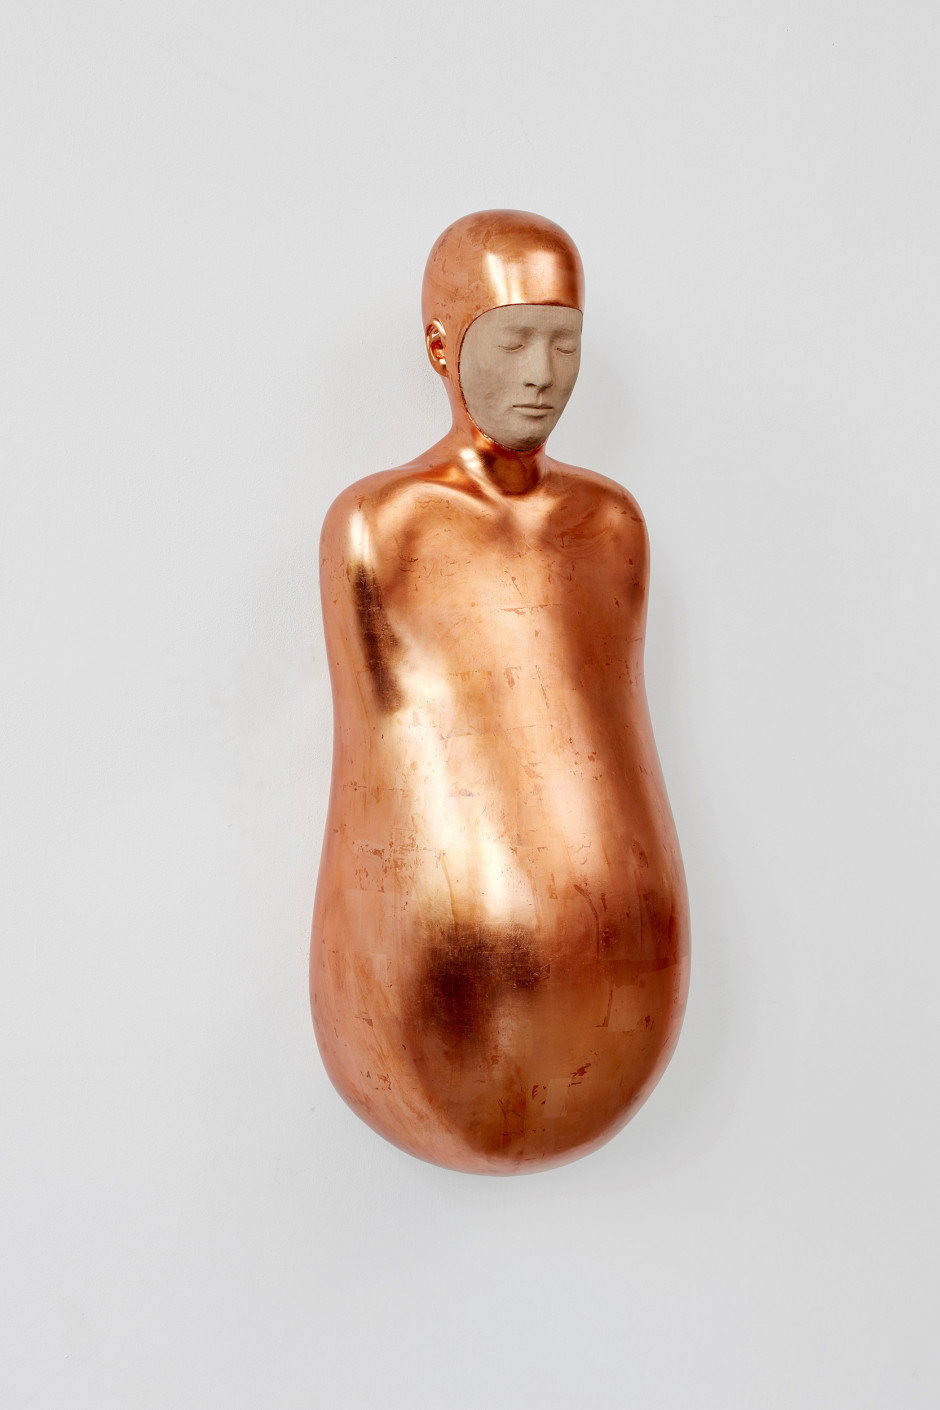 Bumped Body, 2016  carved limewood, copper plating  108.0 x 42.0 x 40.0 cm 42 1/2 x 16 1/2 x 15 11/16 in.